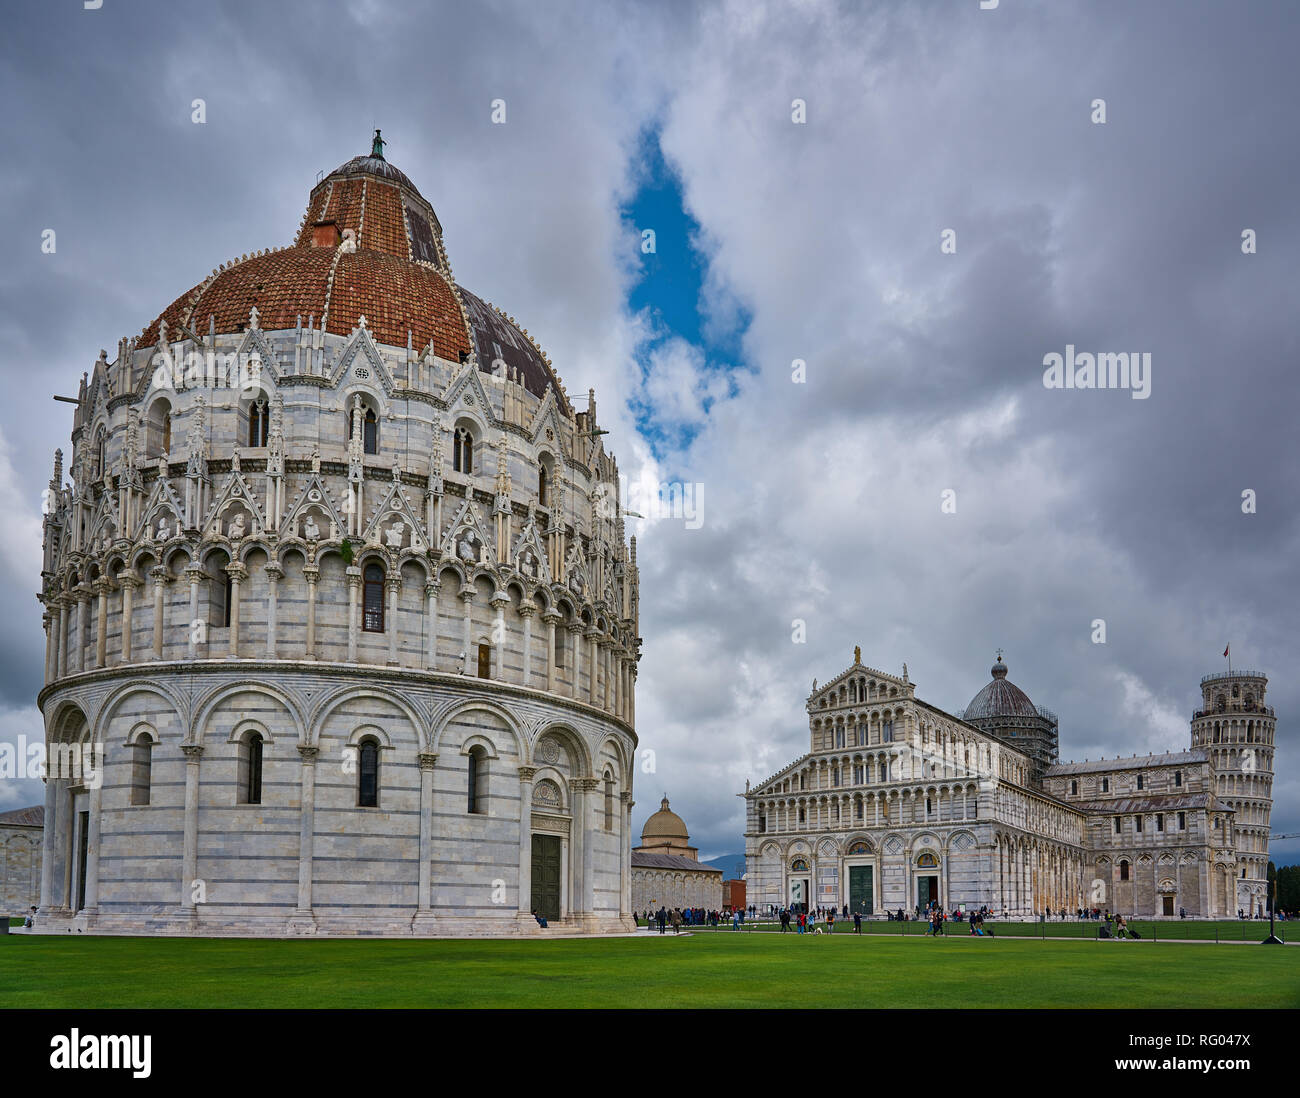 View of The Baptistery, Cathedral of Santa Maria Assunta, and Leaning Tower of Pisa, Italy Stock Photo